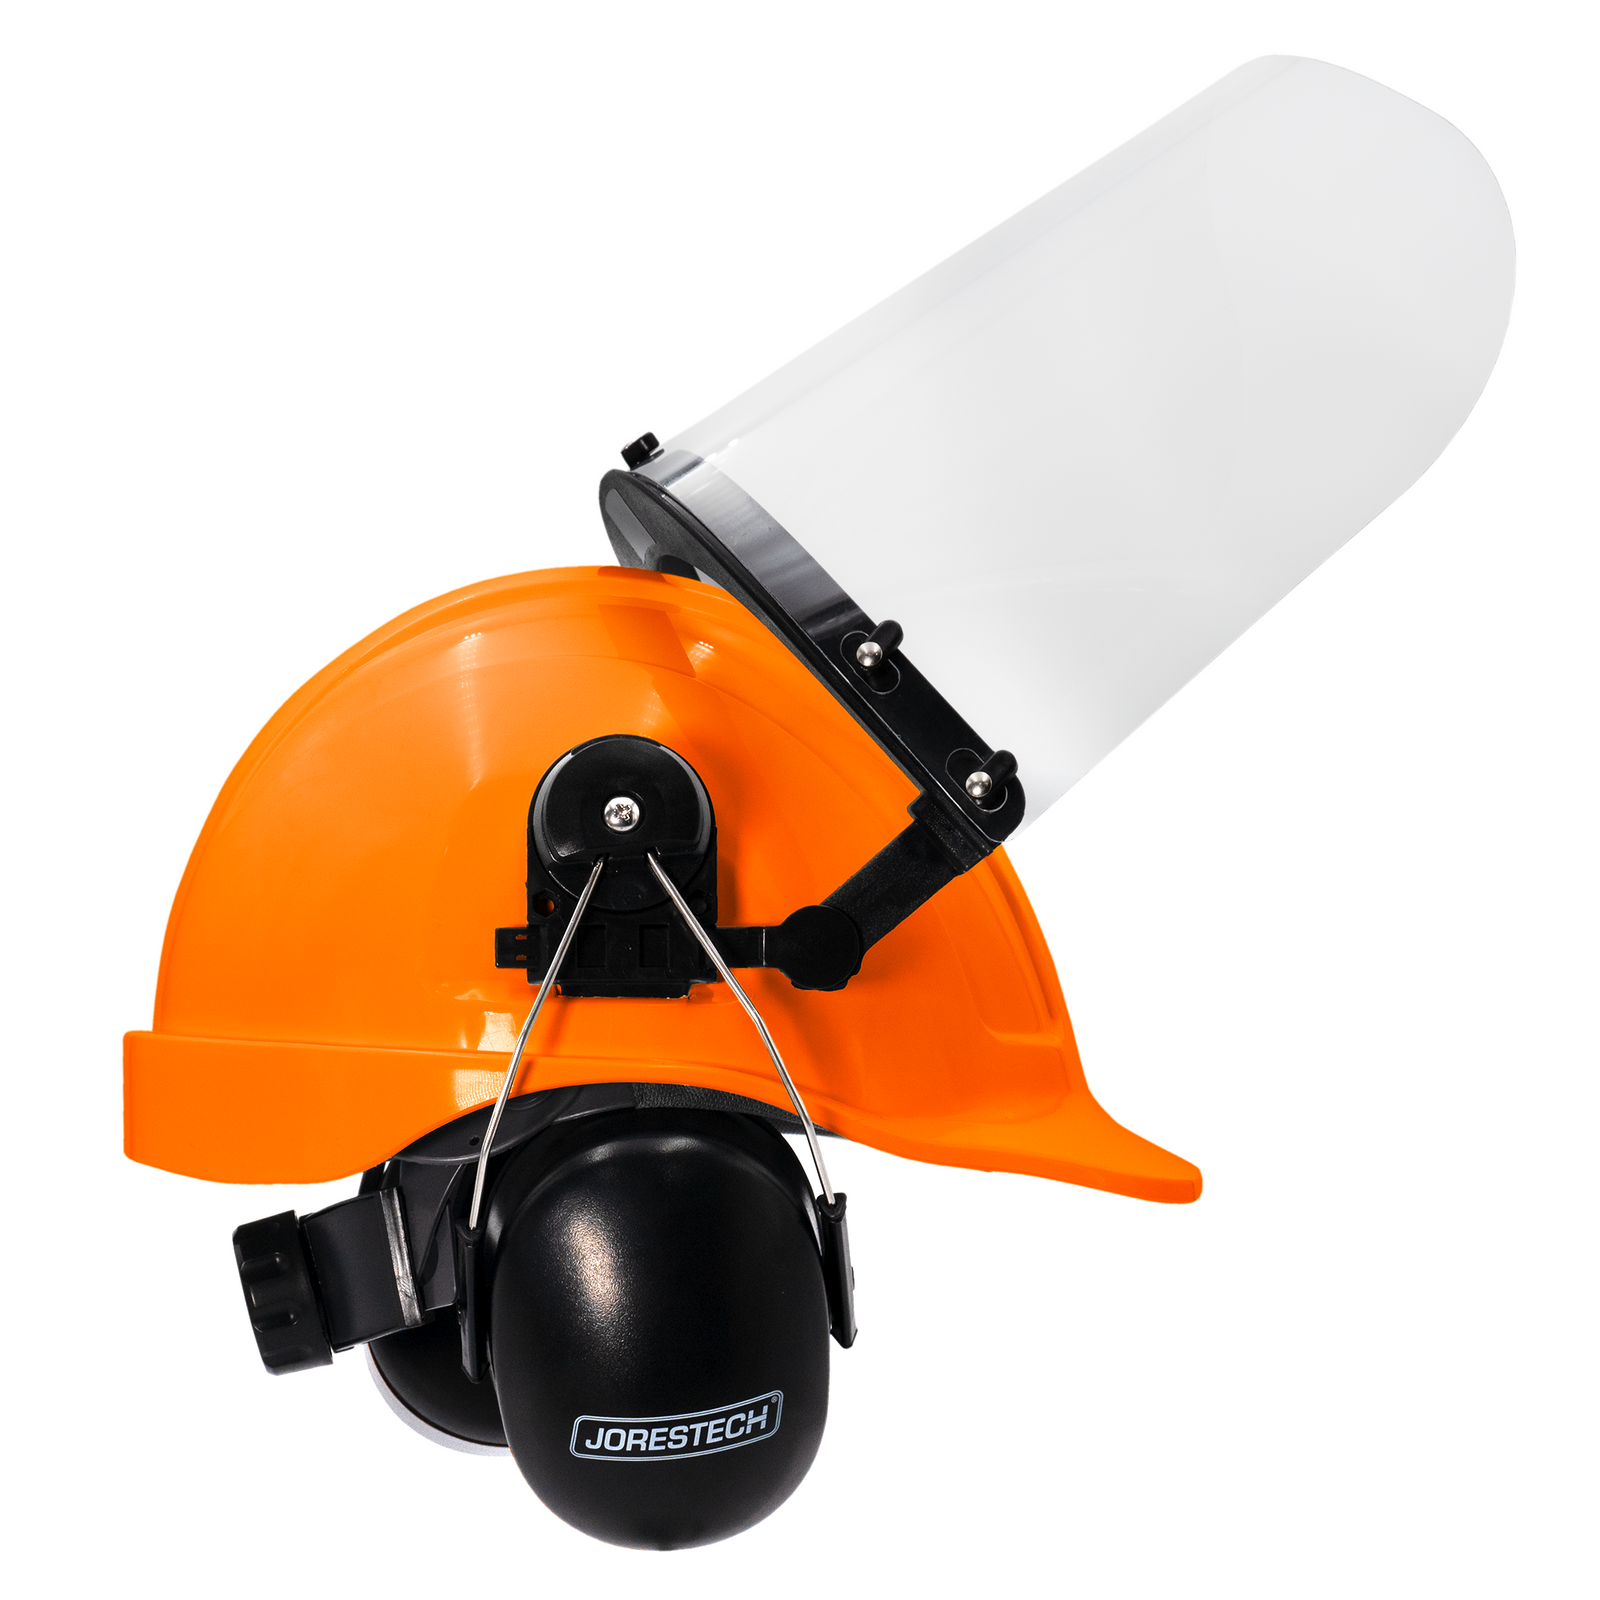 Orange cap style hard hat kit with mountable earmuffs and hi-transparency face shield